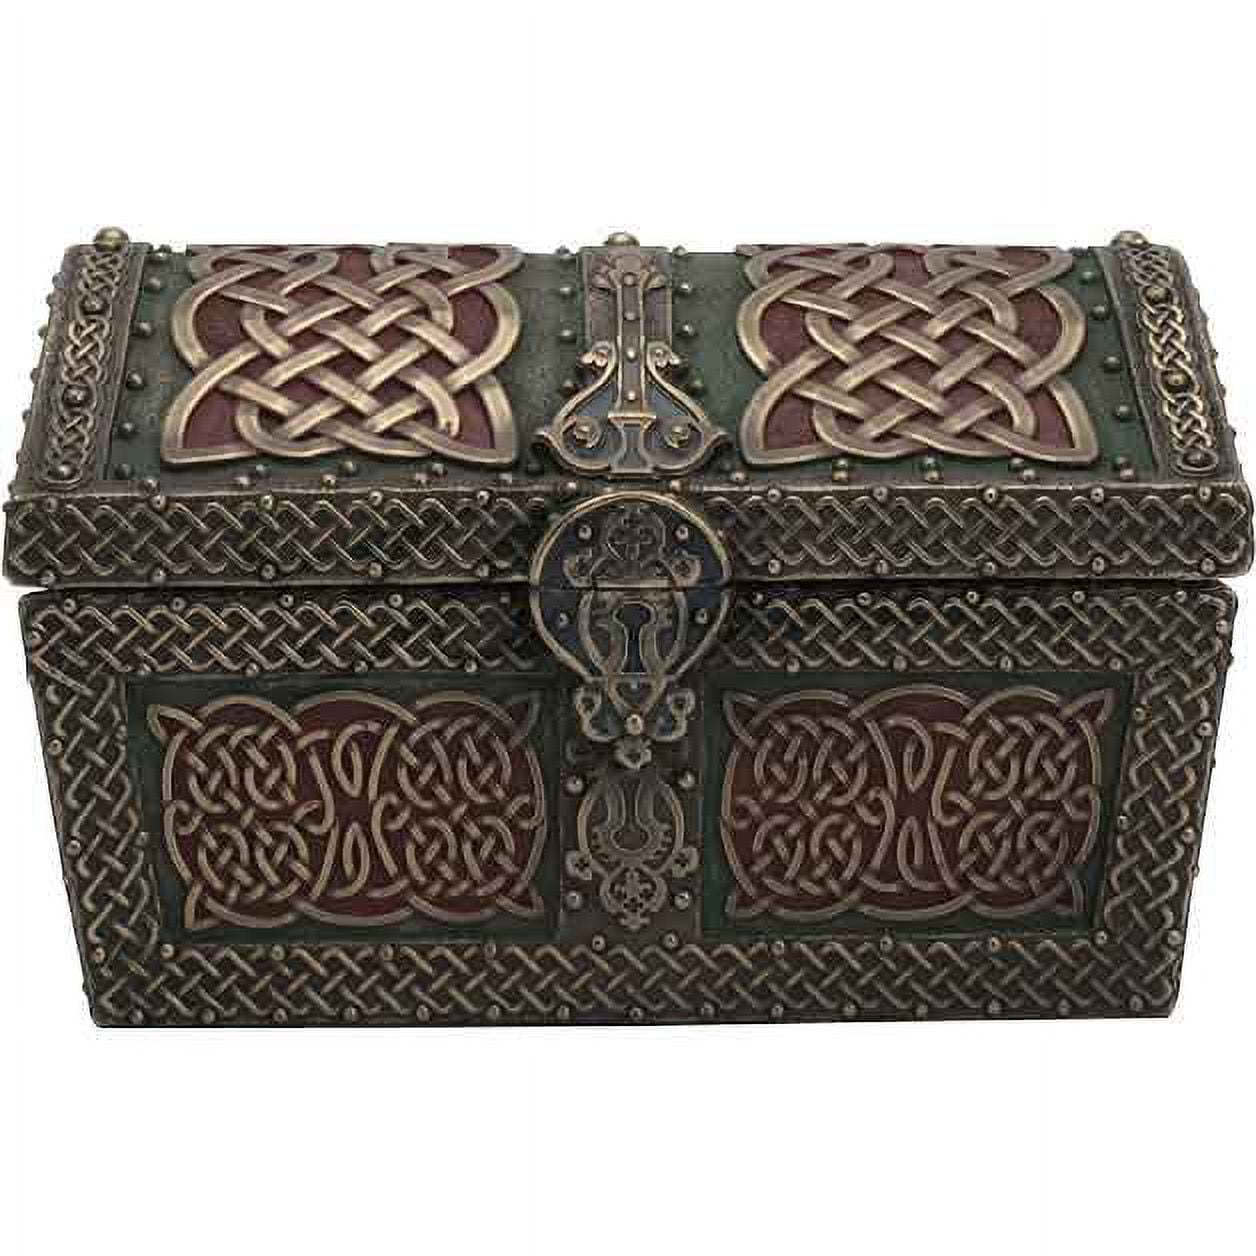 Travelwant Wood and Leather Treasure Chest Wooden Box Jewelry Box with Lock Vintage Handmade Wood Craft Box for Jewelry, Toys, Tarot Cards, Gifts and